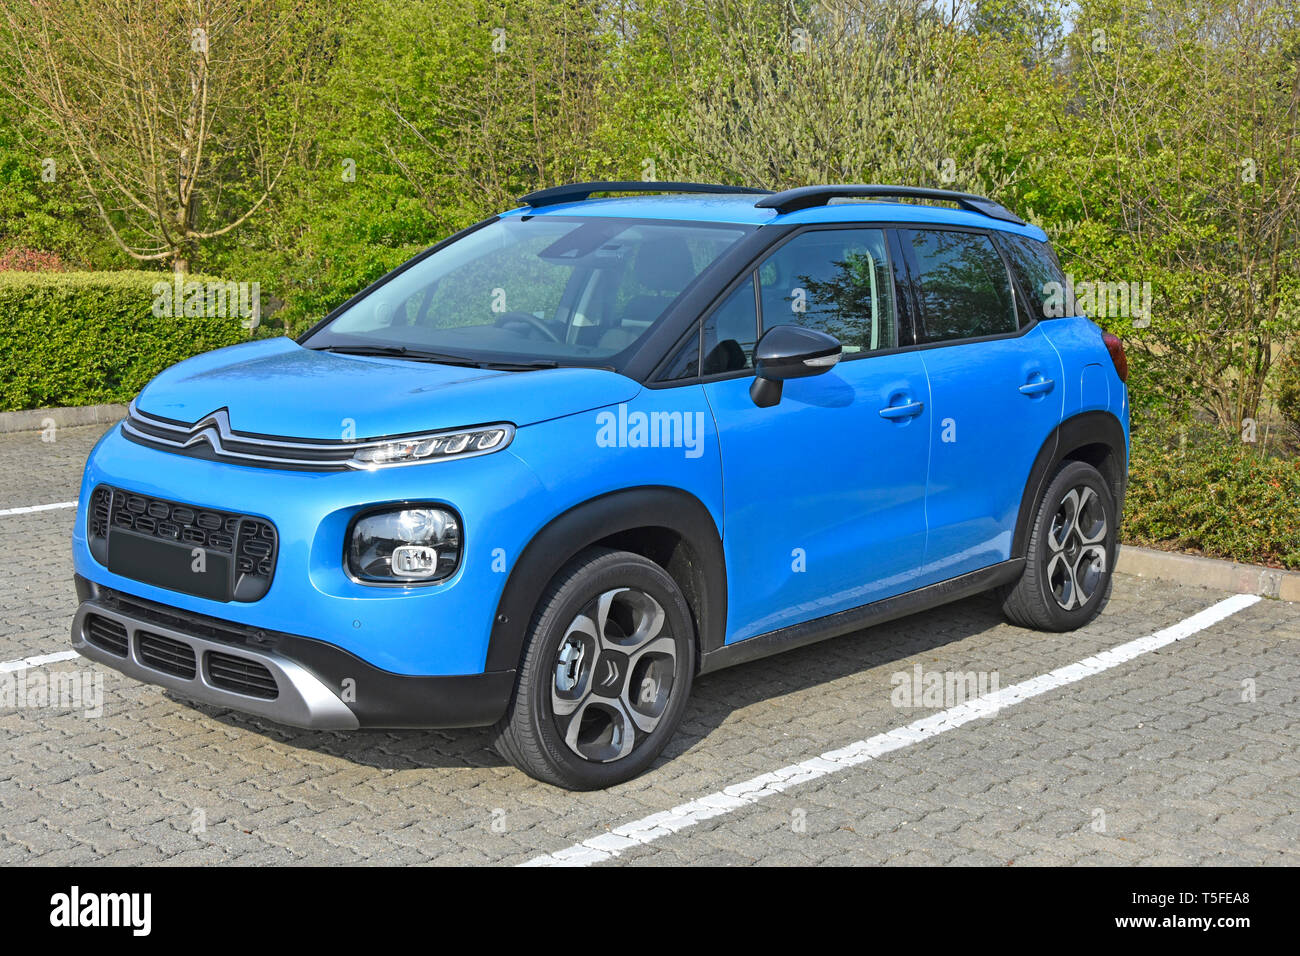 Side & front view of a new 2019 blue Citroen C3 Aircross mini SUV Flair variant with petrol engine 5 door right hand drive hatchback automobile car uk Stock Photo